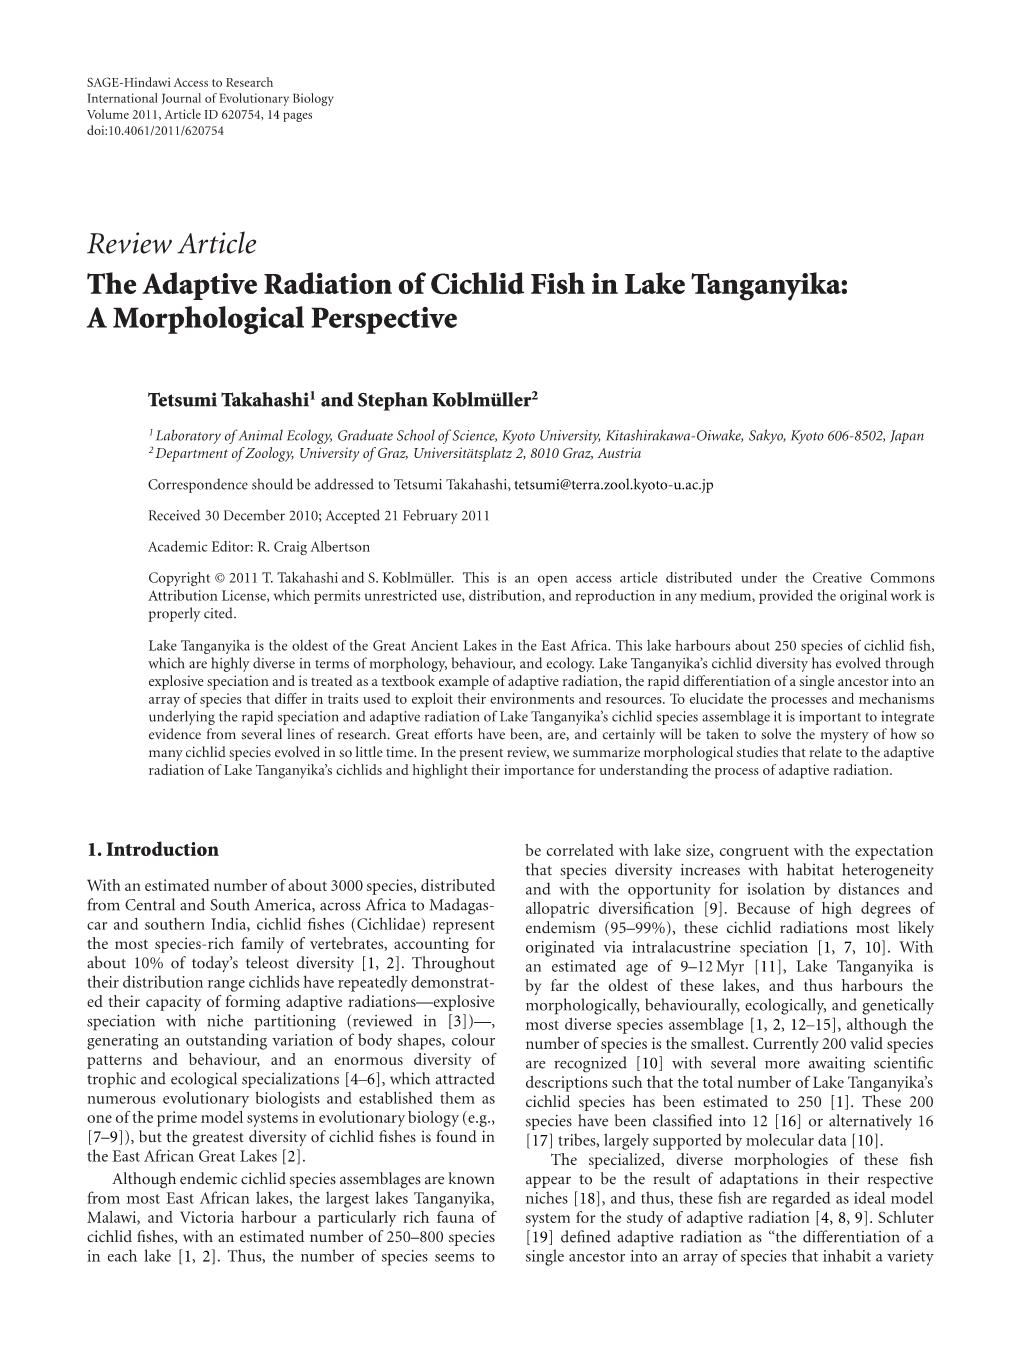 The Adaptive Radiation of Cichlid Fish in Lake Tanganyika: a Morphological Perspective